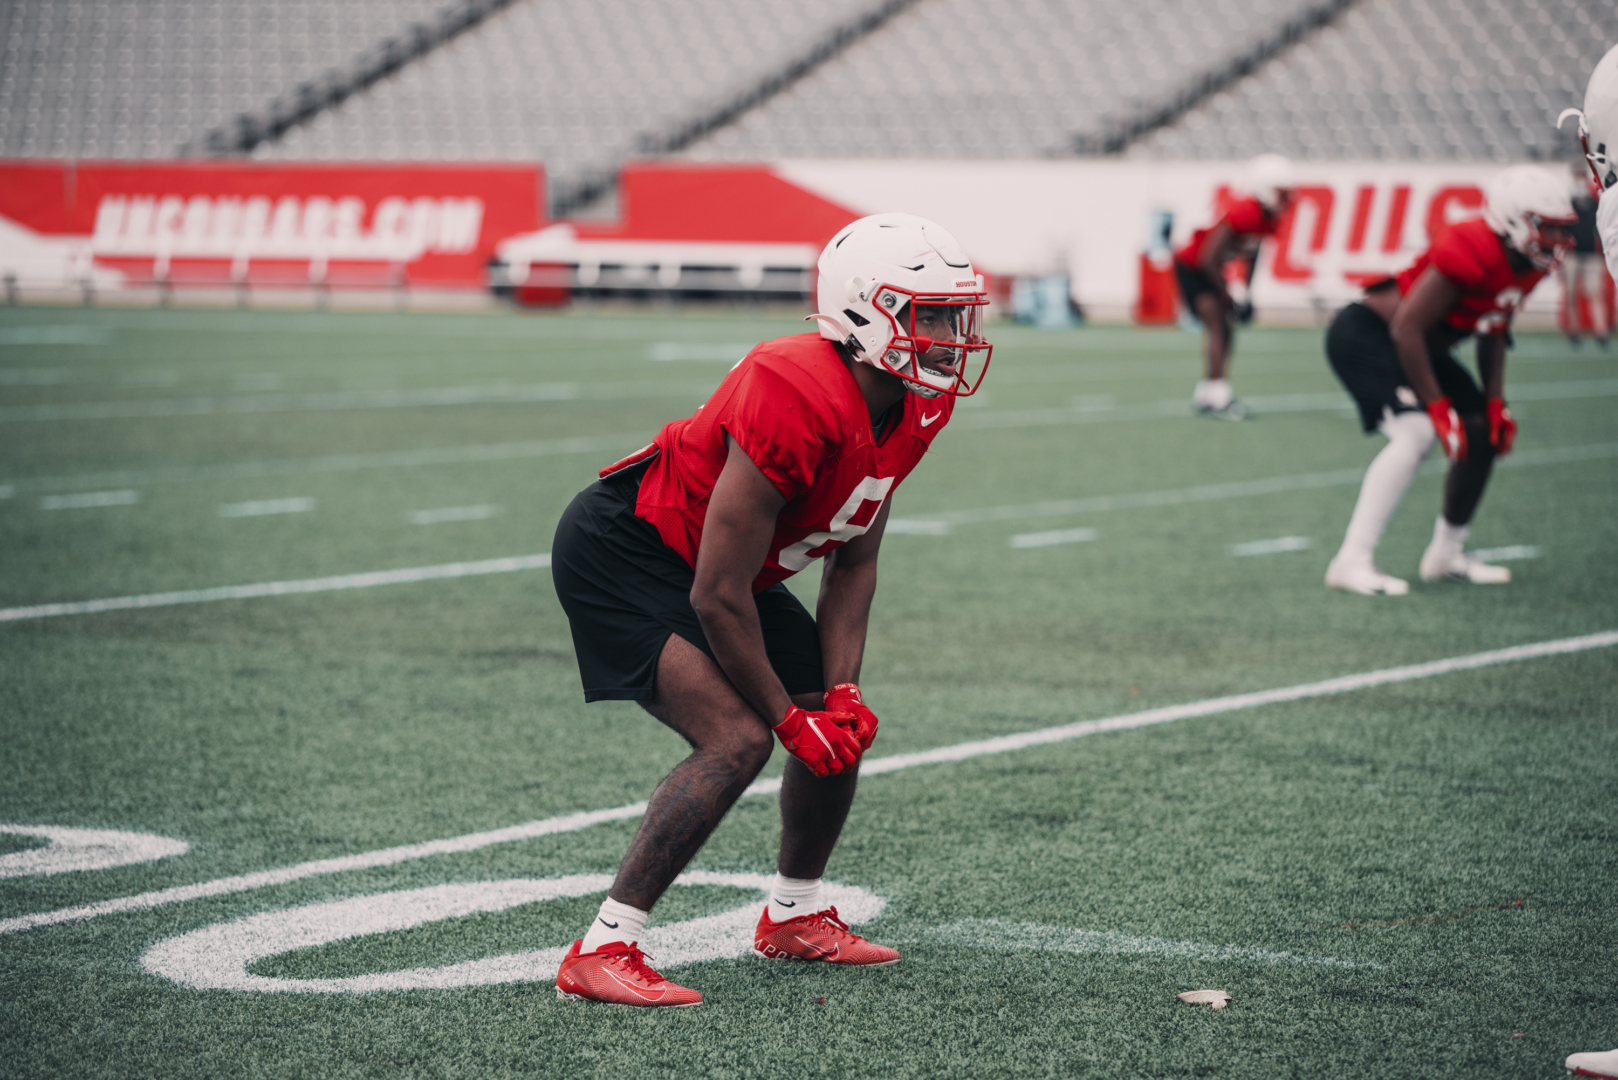 Senior cornerback Marcus Jones has drawn national attention for his play. Jones will be a key mentor to the young Jalen Emery during his freshman season. | Courtesy of UH athletics